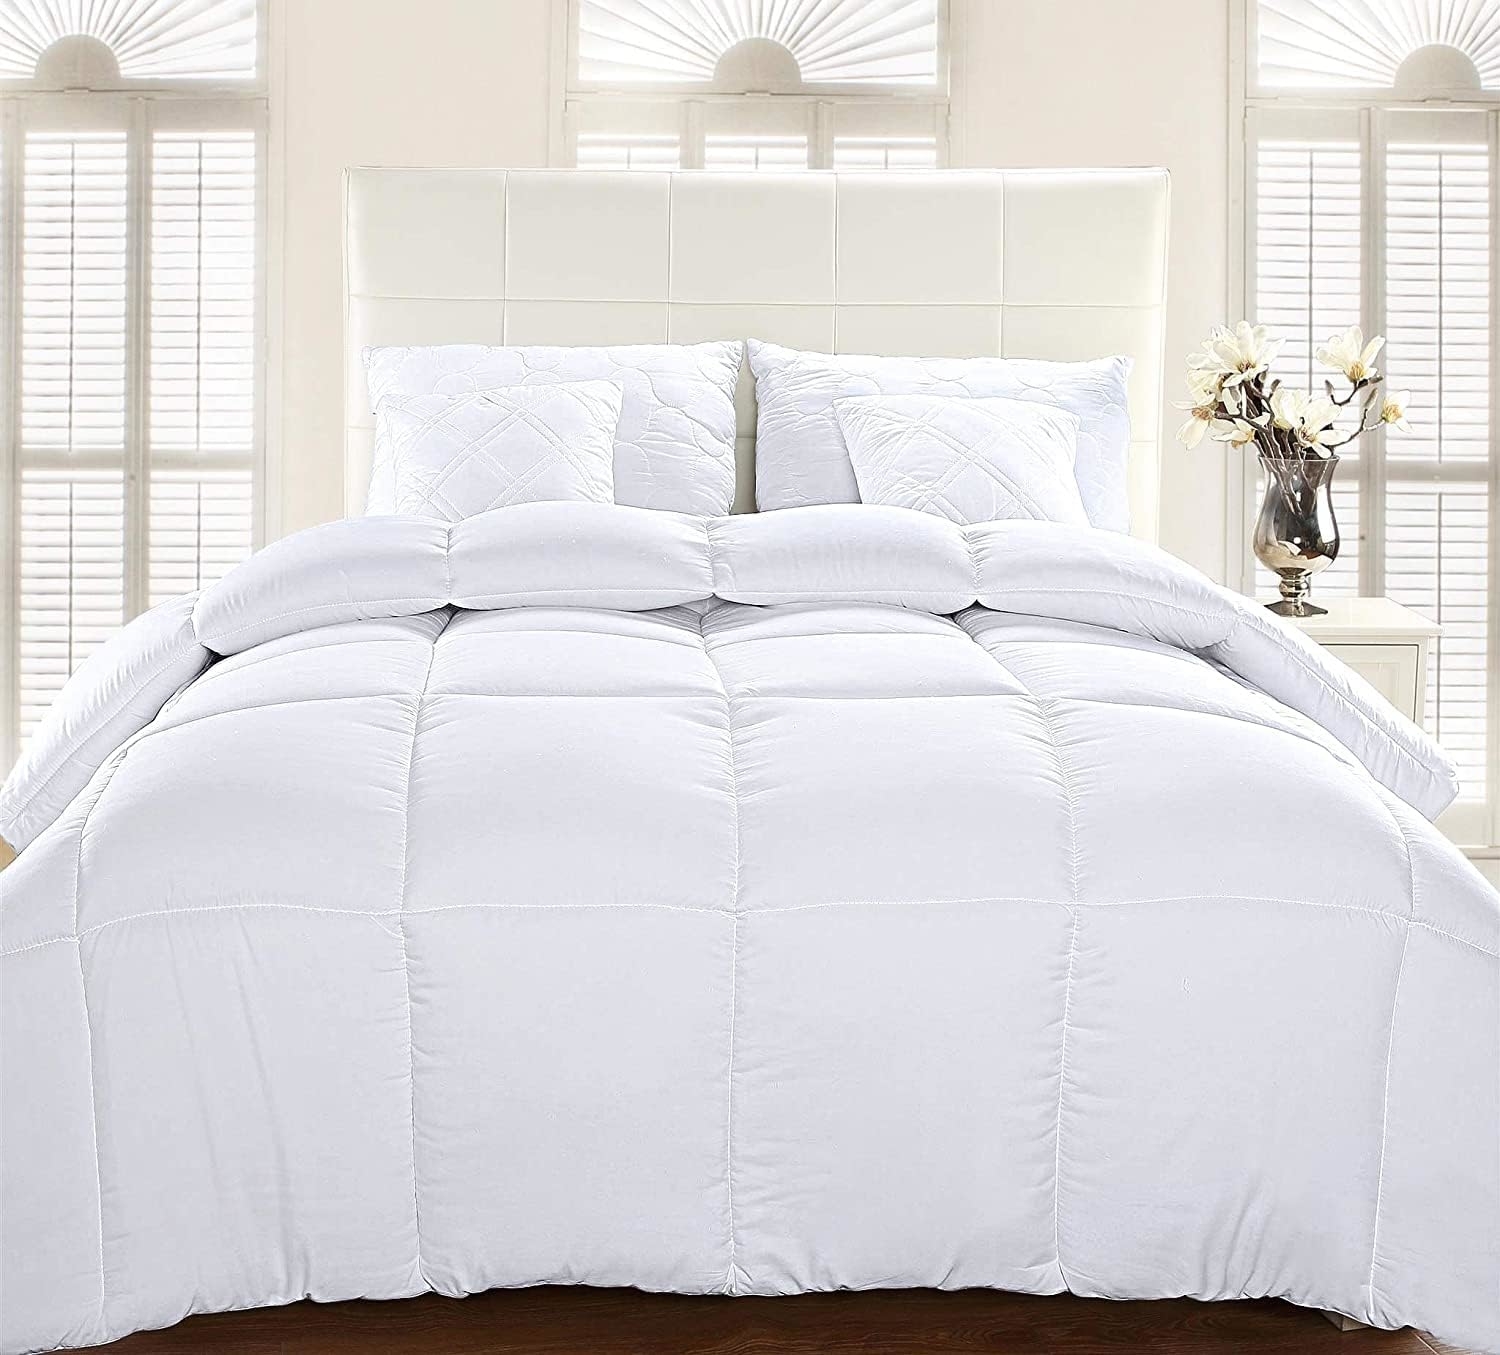 A plush white comforter set displayed on a neat bed with matching pillows in a bright bedroom setting